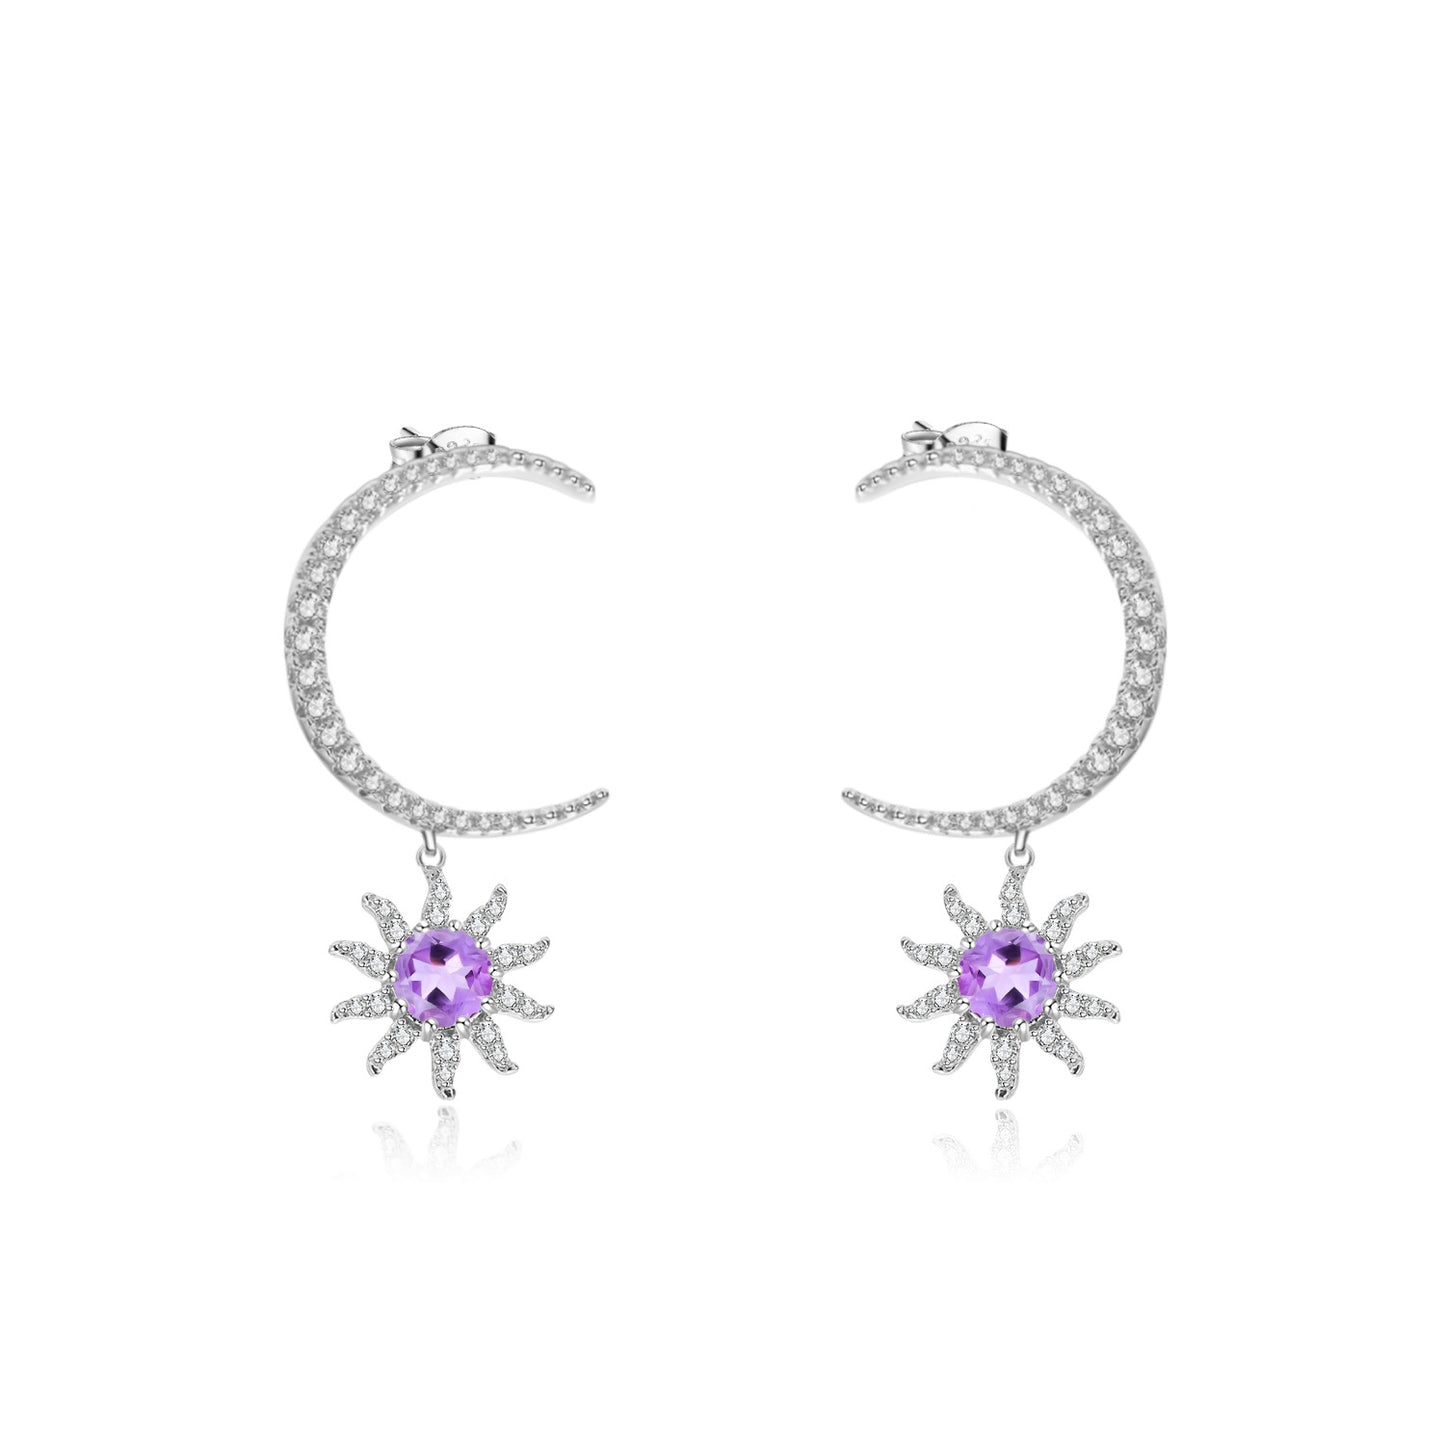 French Romantic Luxury Design Inlaid Natural Colourful Gemstone Moon and Sun Silver Drop Earrings for Women